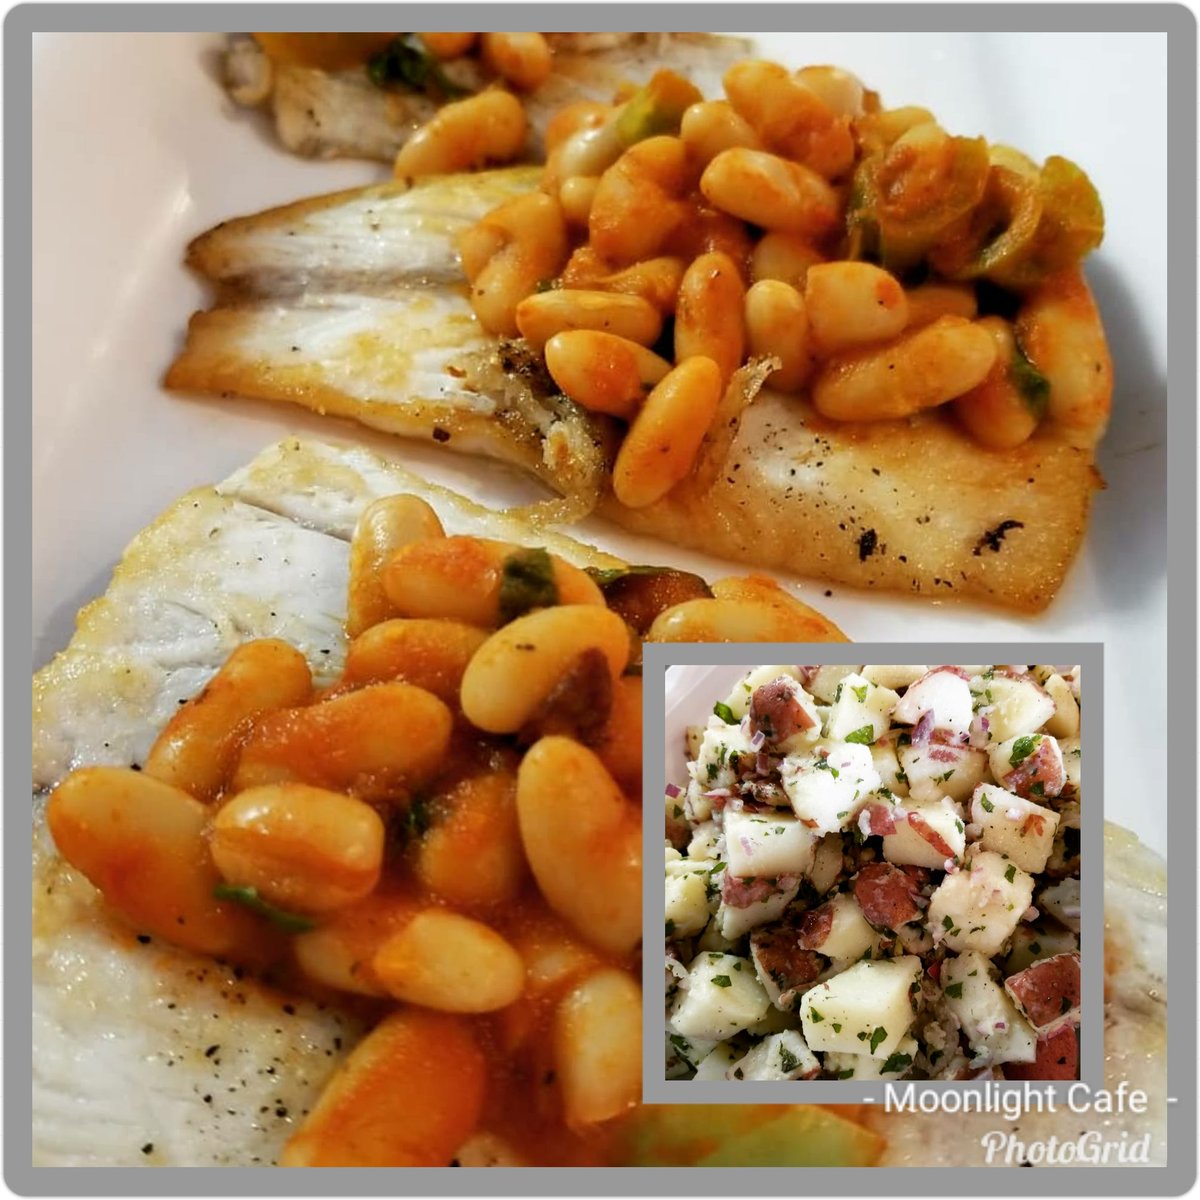 Australian barramundi with a white bean cassoulet paired with our Persian potato salad #matchmadeinheaven #dinnerideas #takeoutordinein #mlc #relaxedfoodjoint #fishdishoftheday #potatoperfection #homemade #openforbusiness @ Moonlight Cafe & Caterers